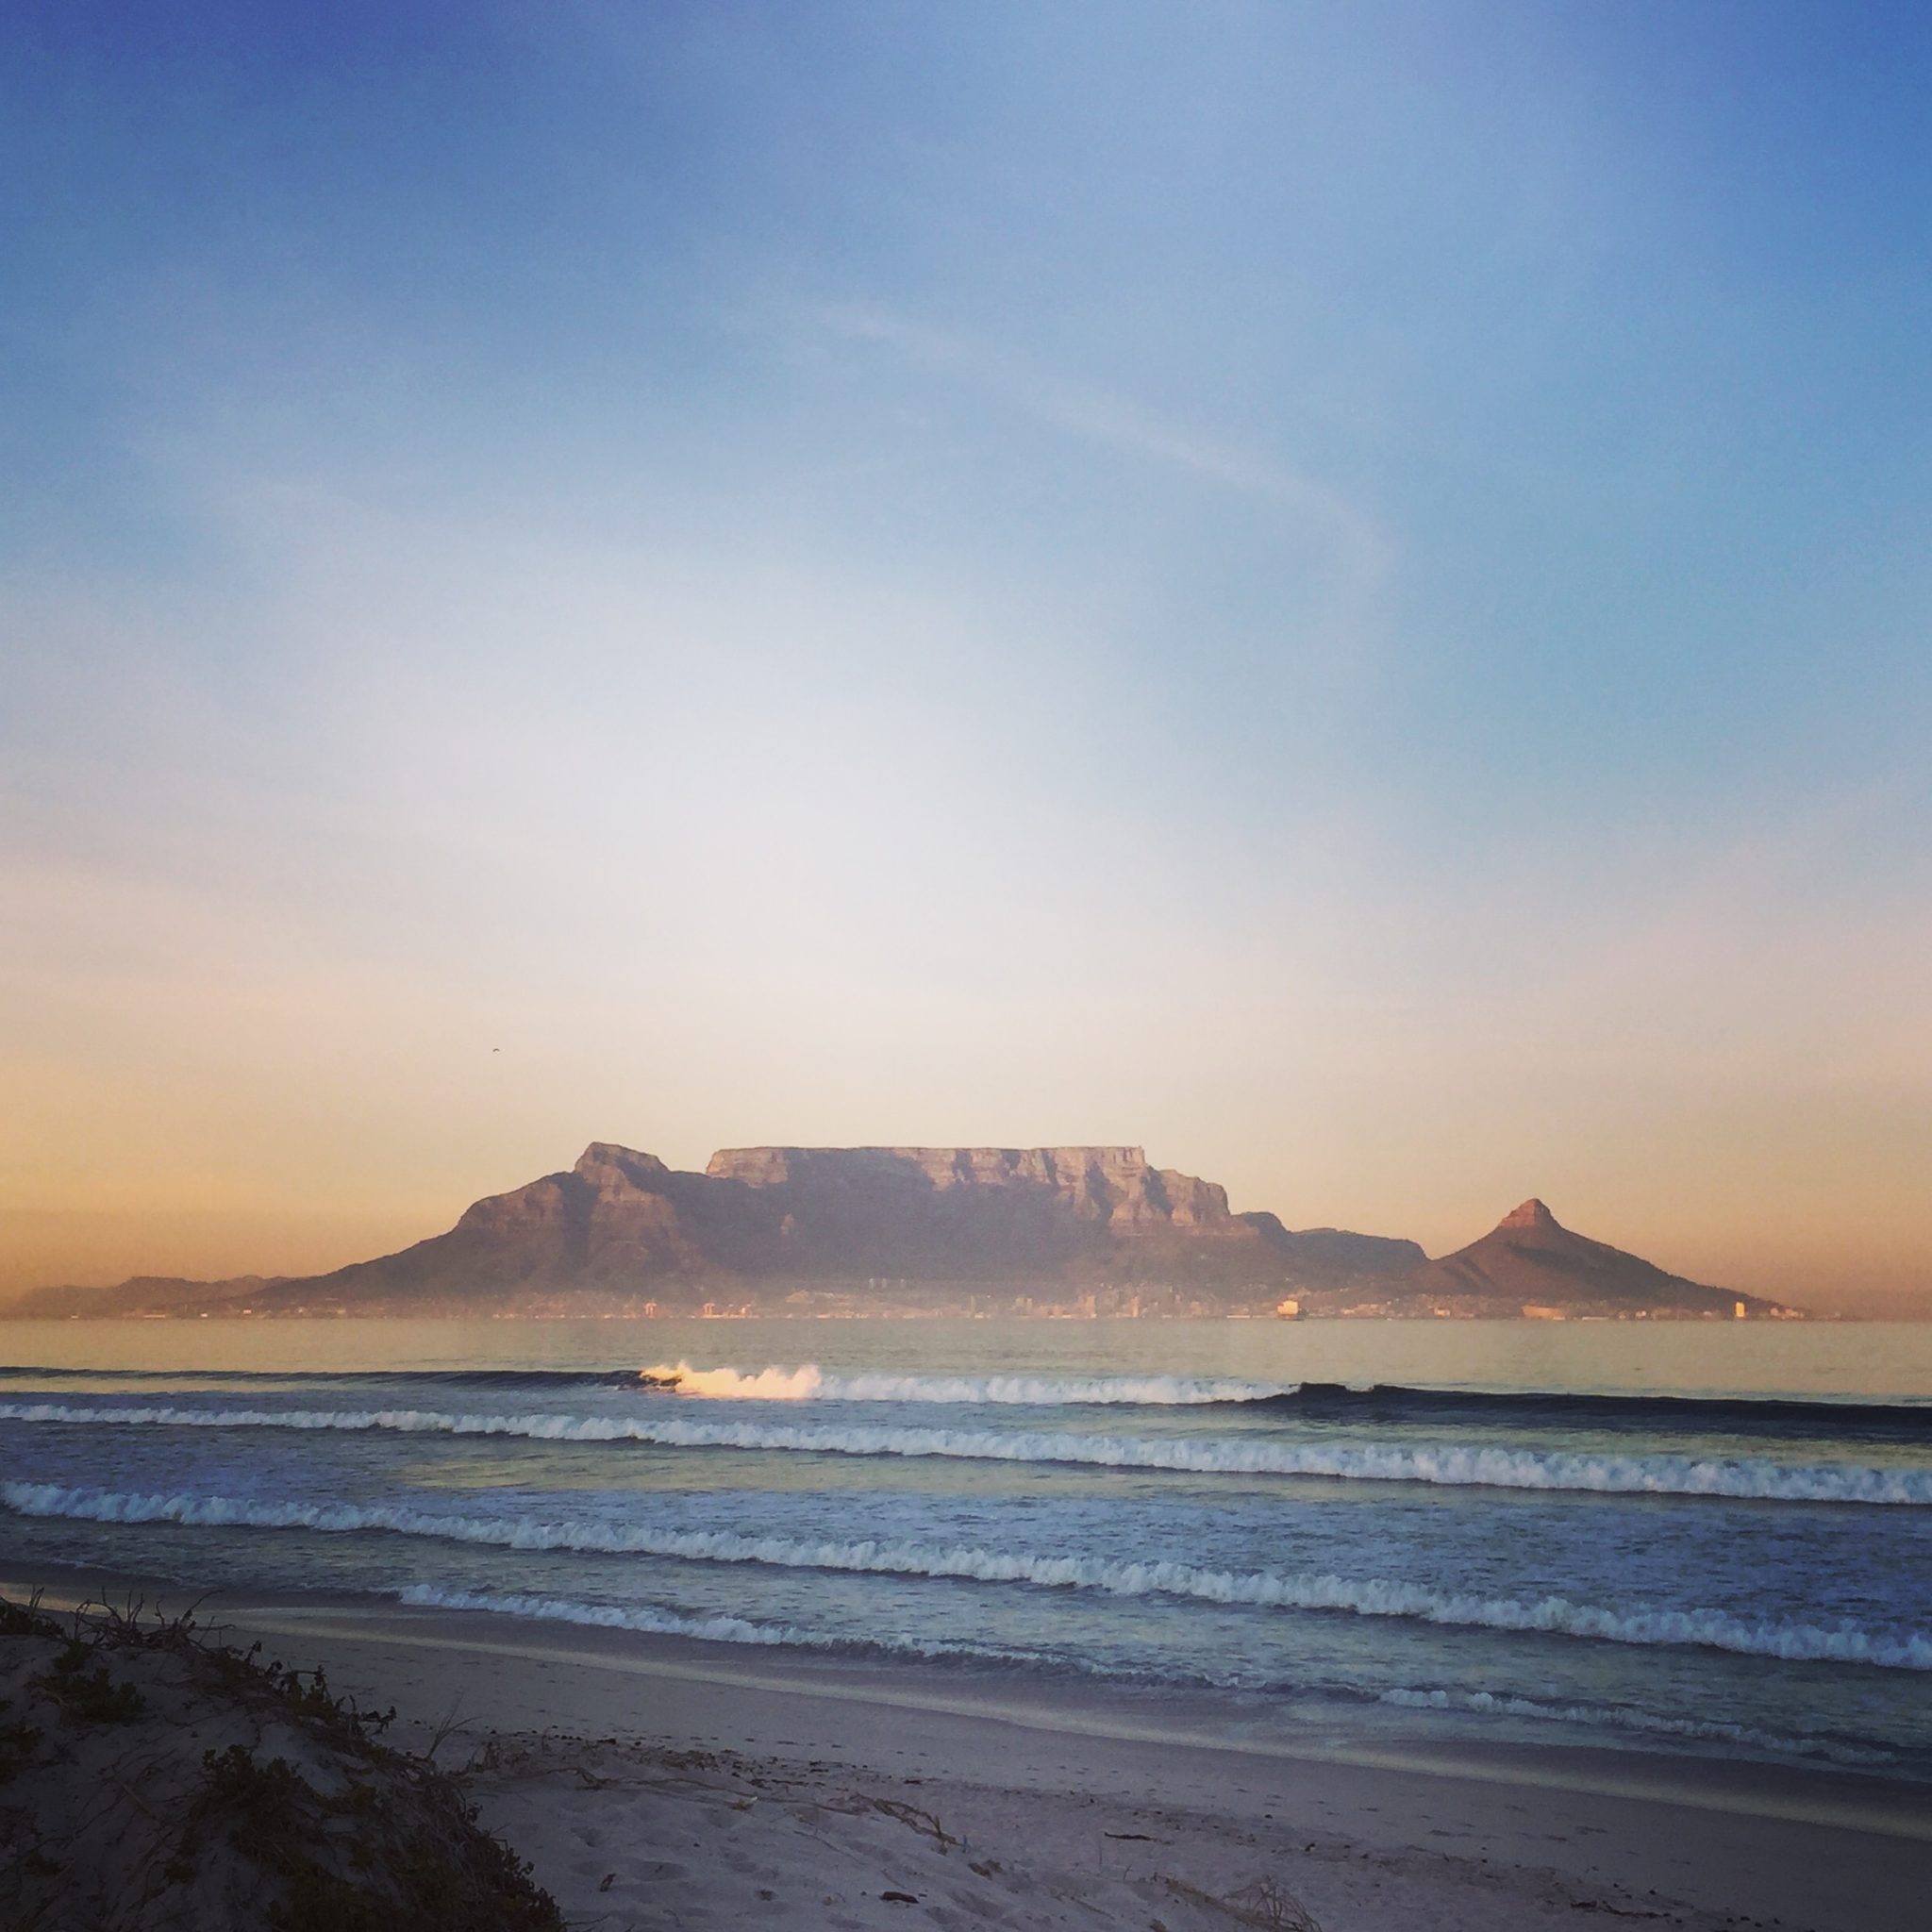 Table Mountain, viewed from the suburb of Bloubergstrand, Cape Town, South Africa